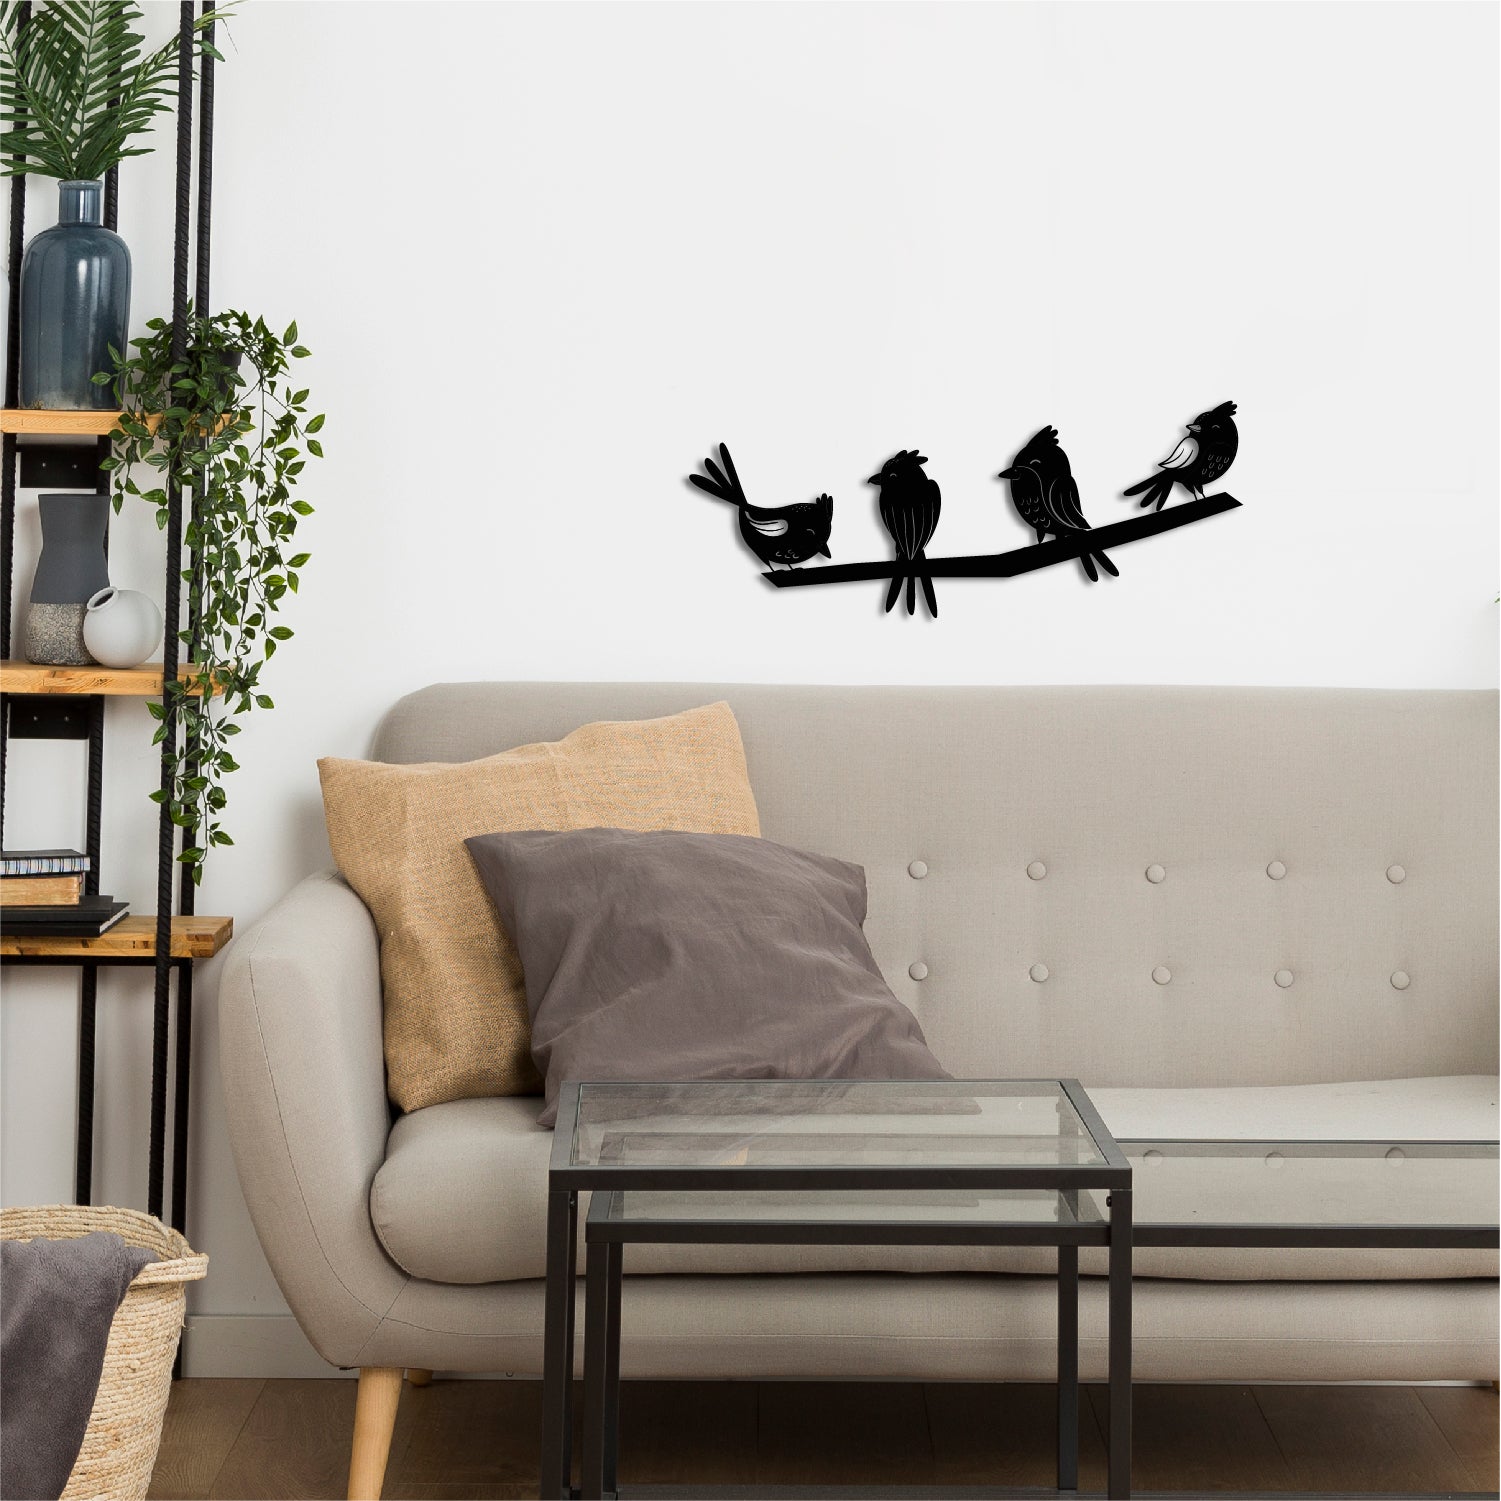 Birds On A Branch Black Engineered Wood Wall Art Cutout, Ready To Hang Home Decor 4